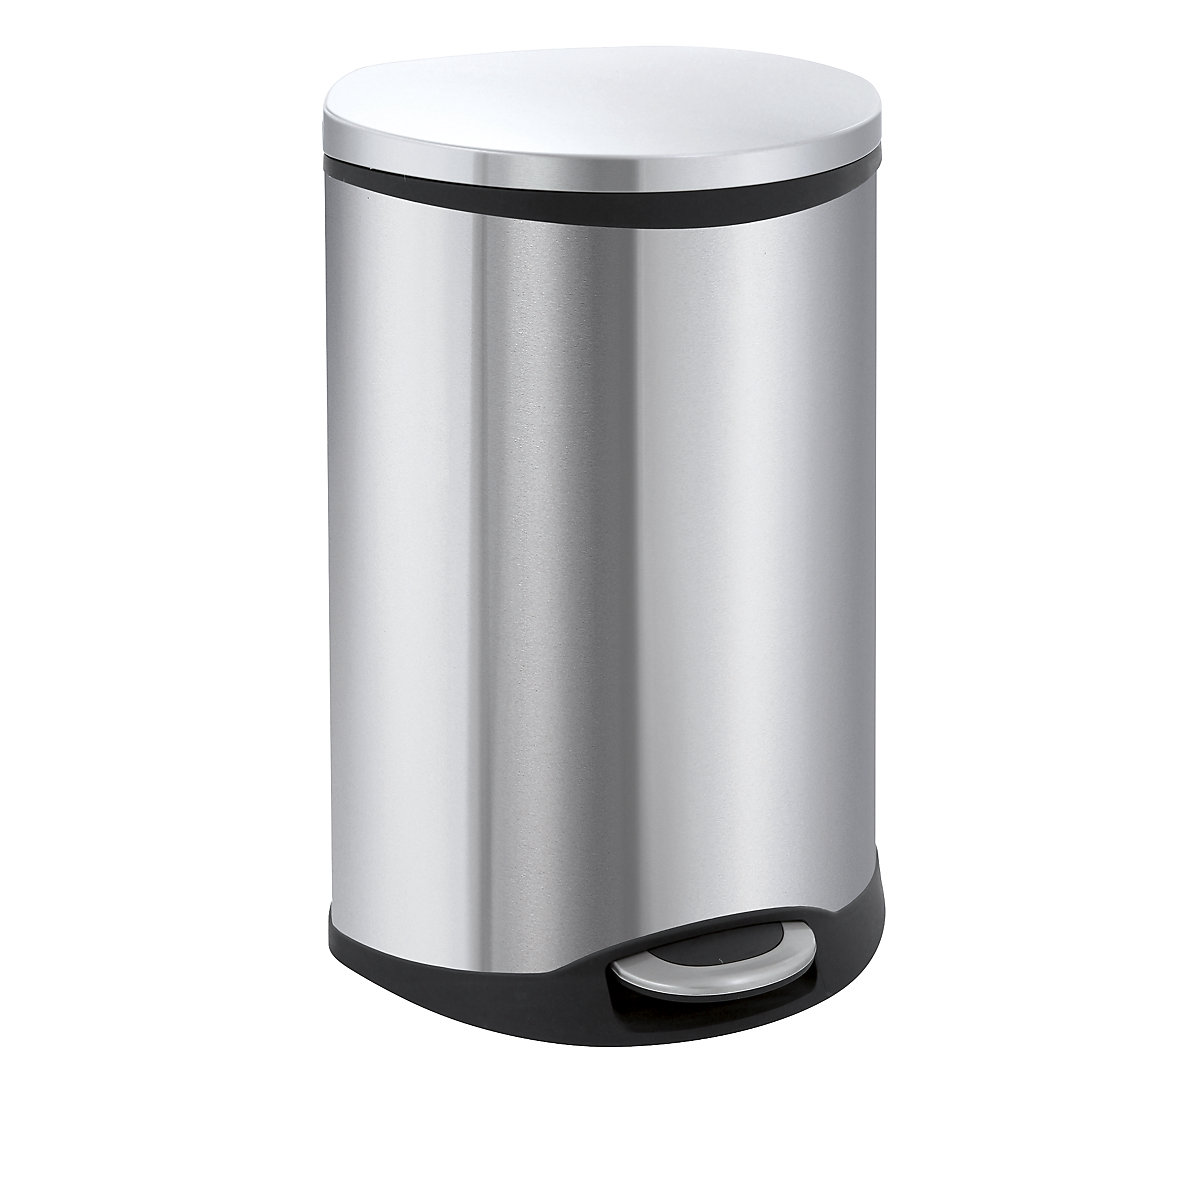 Waste collector with pedal, shell shape – EKO, capacity 18 l, HxWxD 524 x 298 x 336 mm, stainless steel body-4